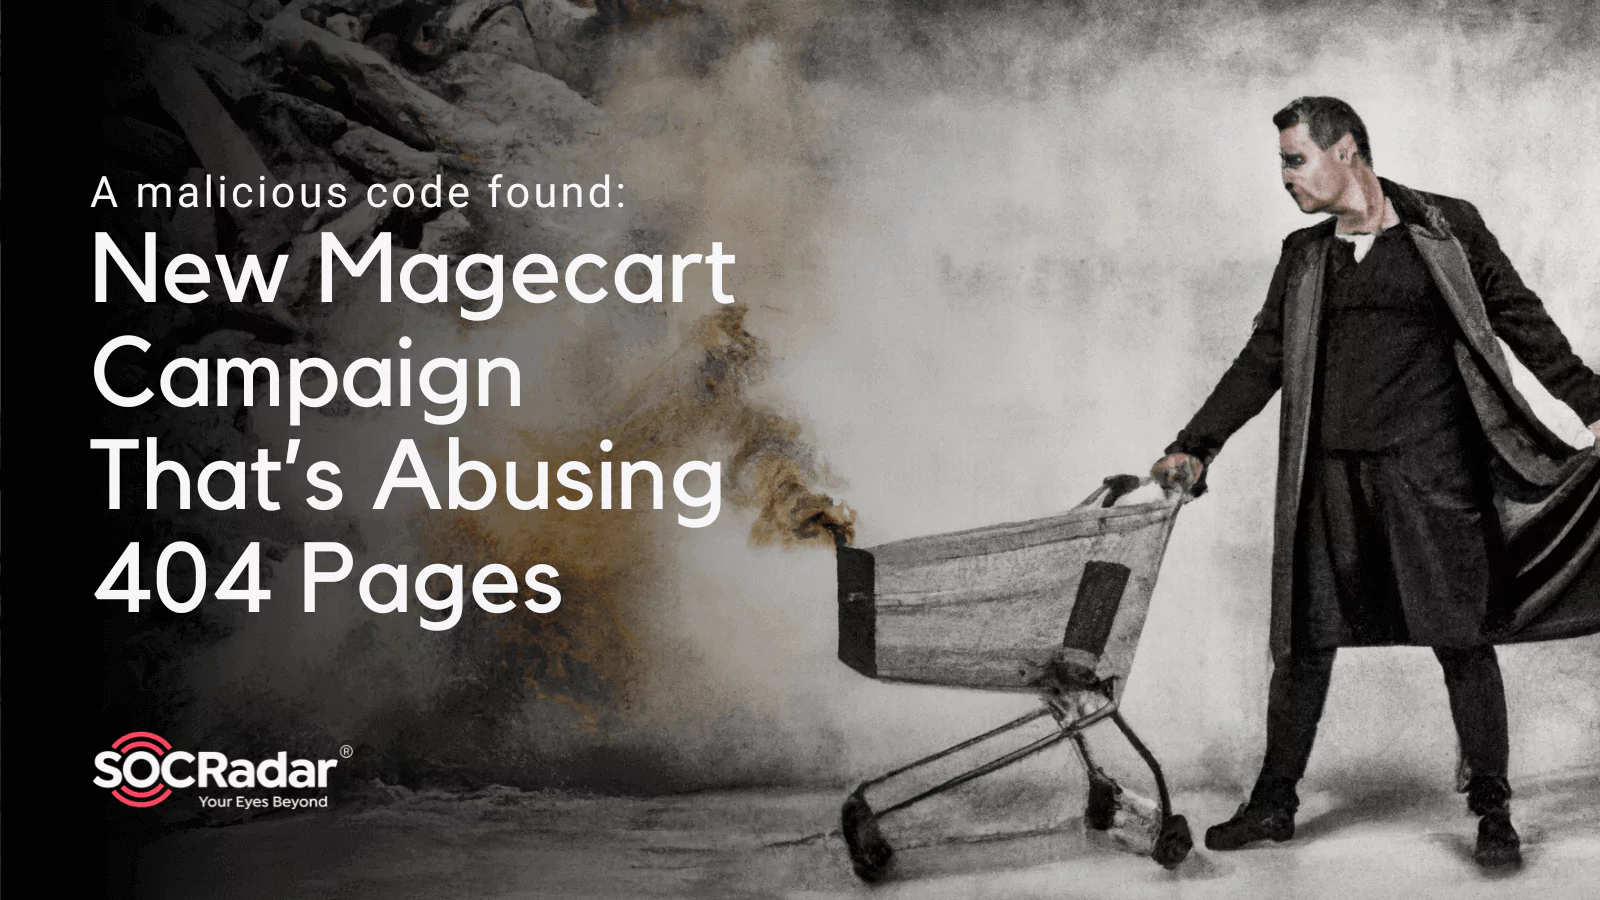 SOCRadar® Cyber Intelligence Inc. | A malicious code found: New Magecart Campaign That’s Abusing 404 Pages